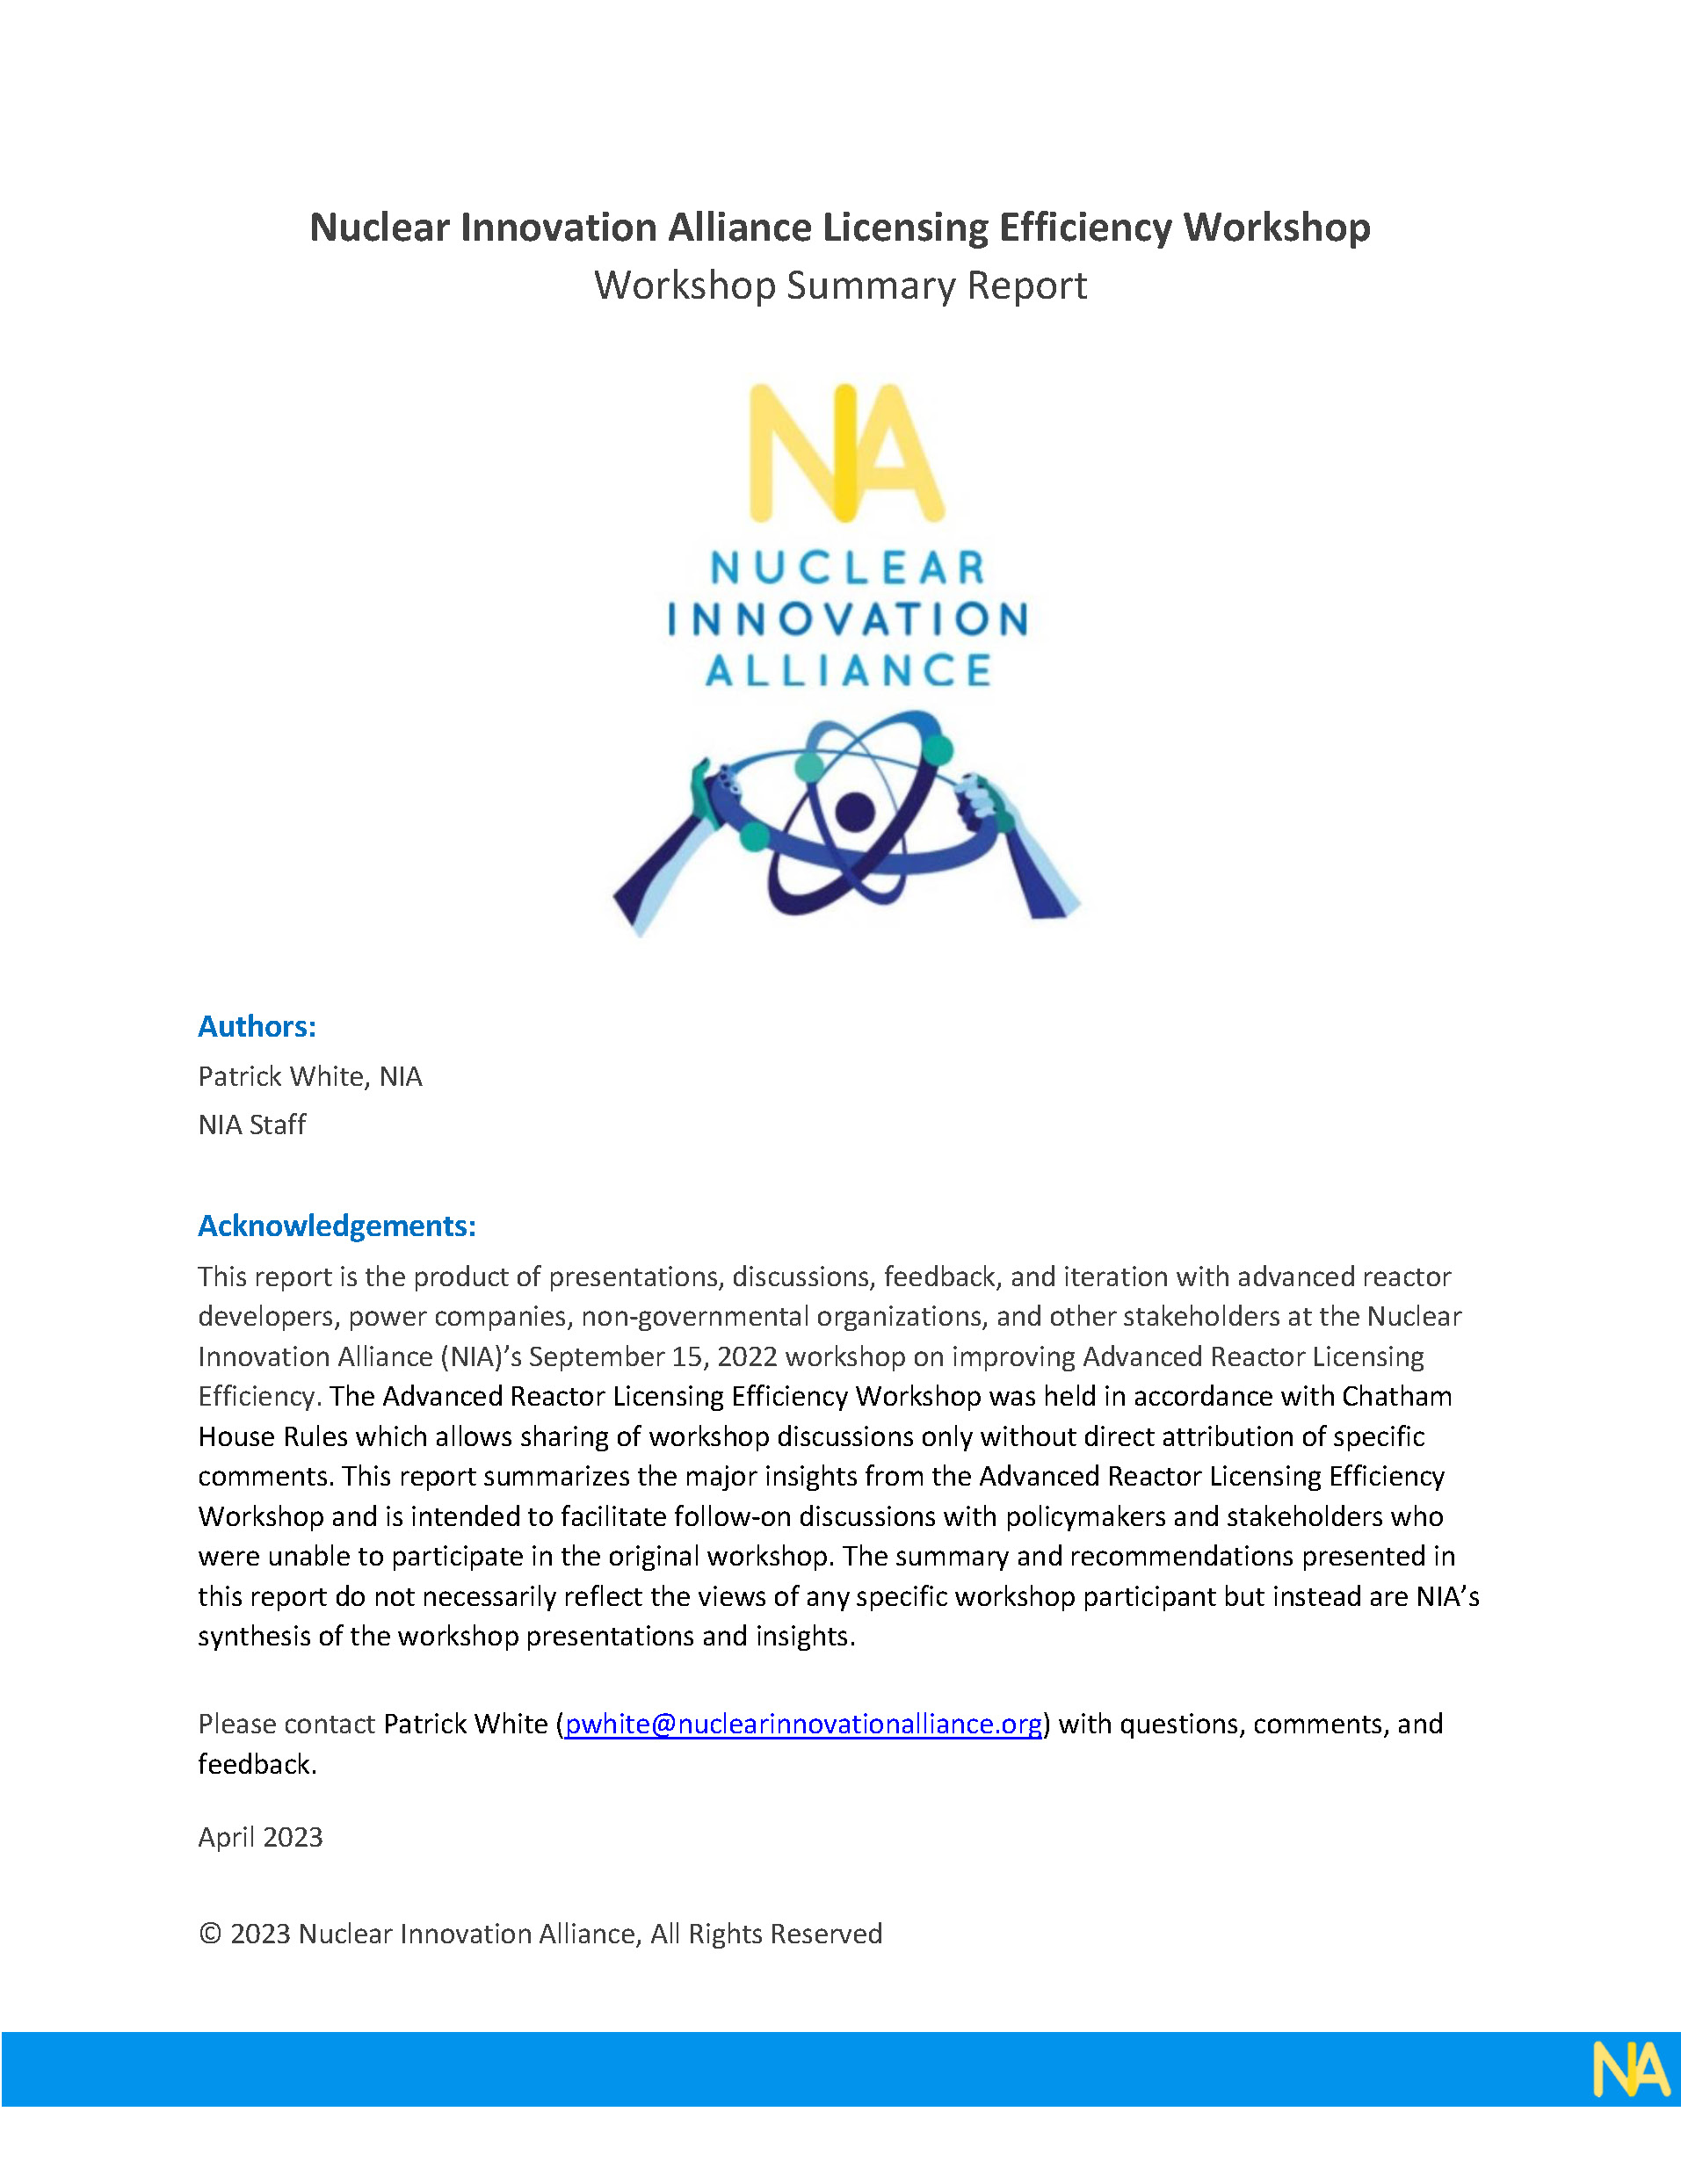 Nuclear Innovation Alliance Licensing Efficiency Workshop Summary Report